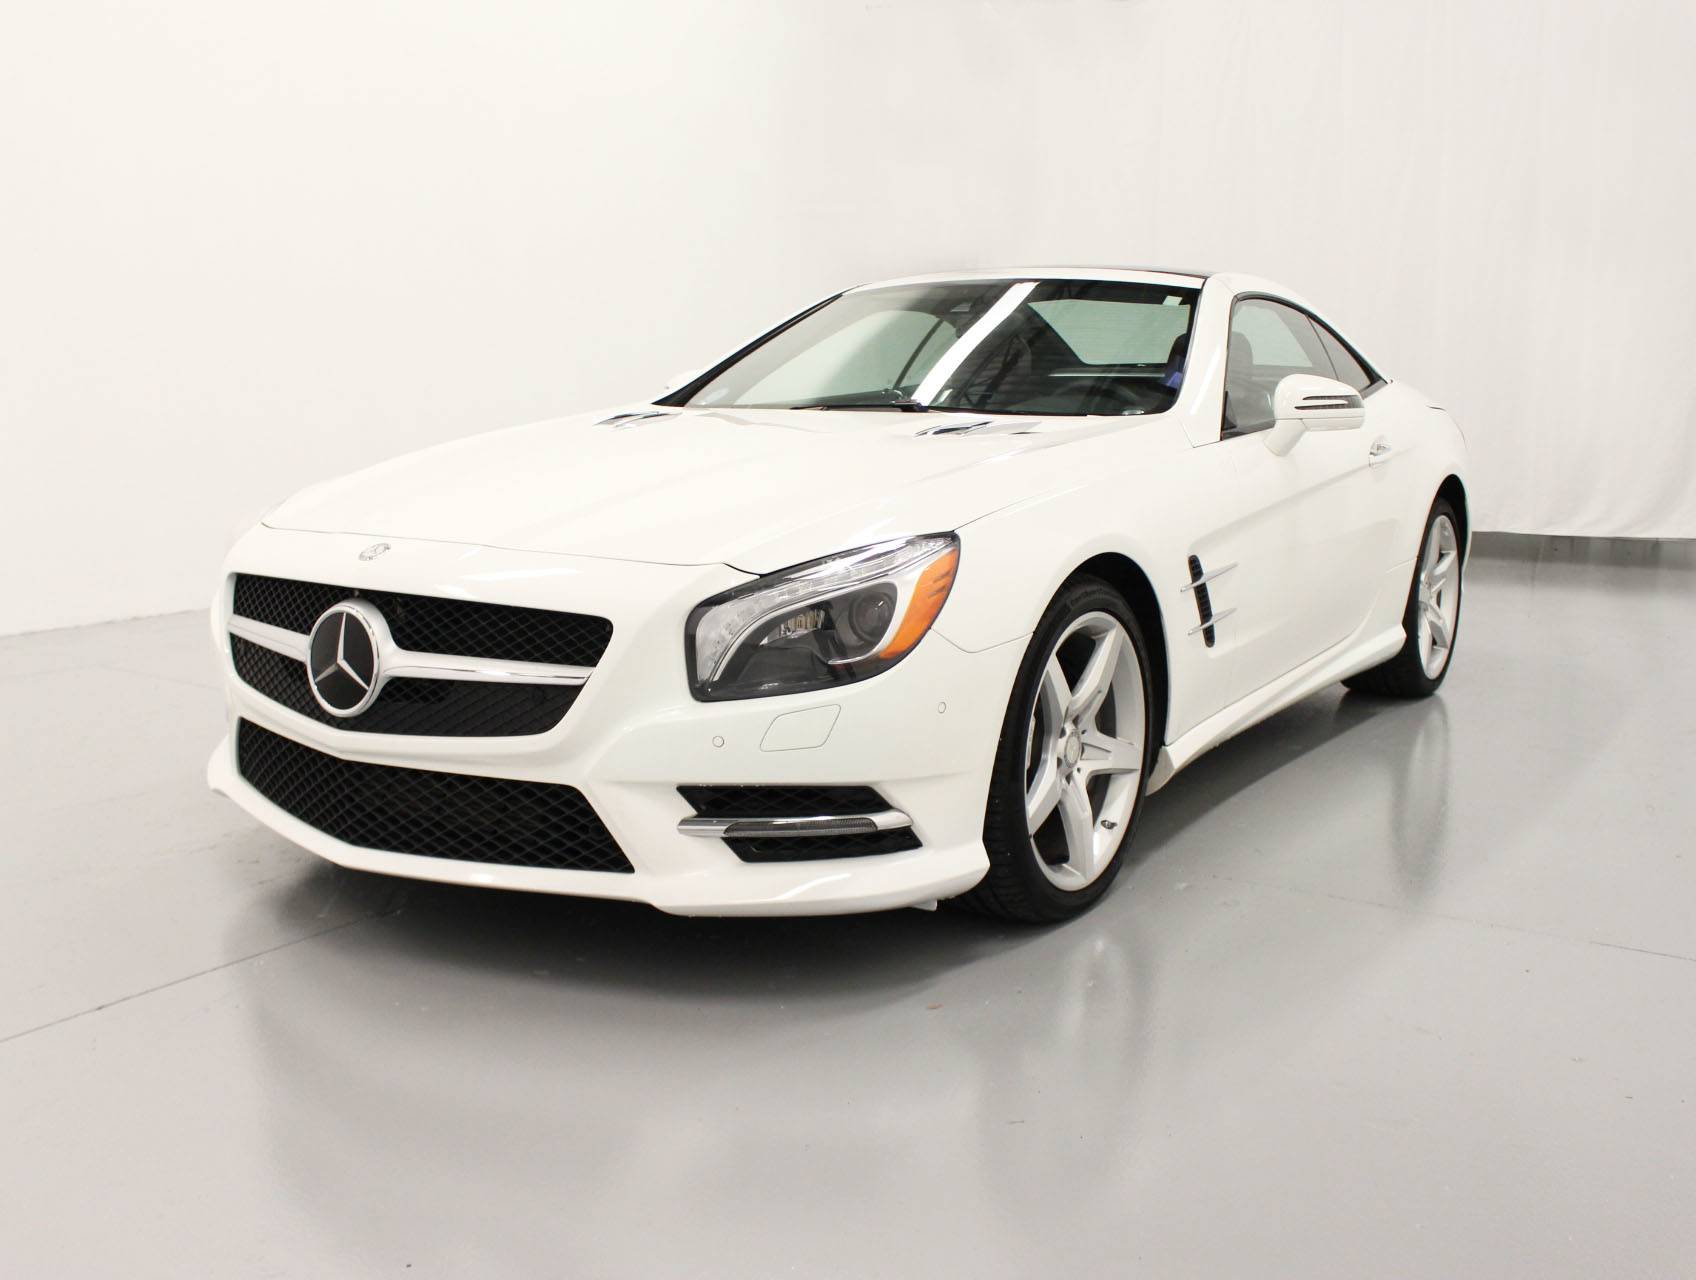 Used 2016 Mercedes Benz Sl Class Sl550 Convertible For Sale In Margate Fl 97914 Florida Fine Cars